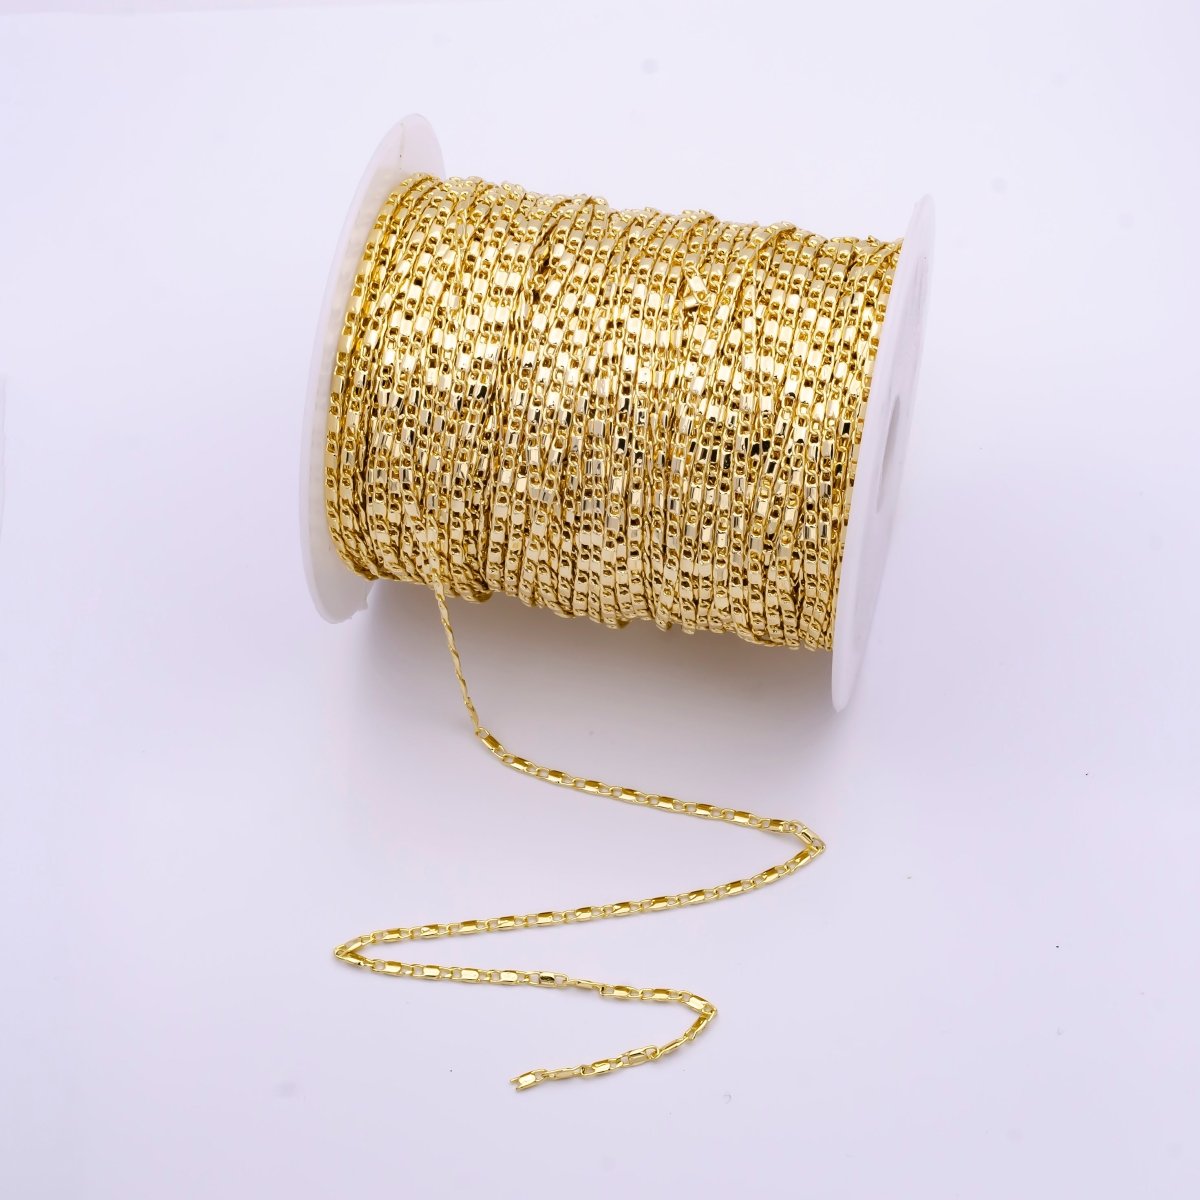 24K Gold Filled Flat Bar Unique Chain, 3mm Unique Lock Chain By Yard, For Necklace, Bracelet, Anklet Supply Component | ROLL-266 ROLL-822 - DLUXCA